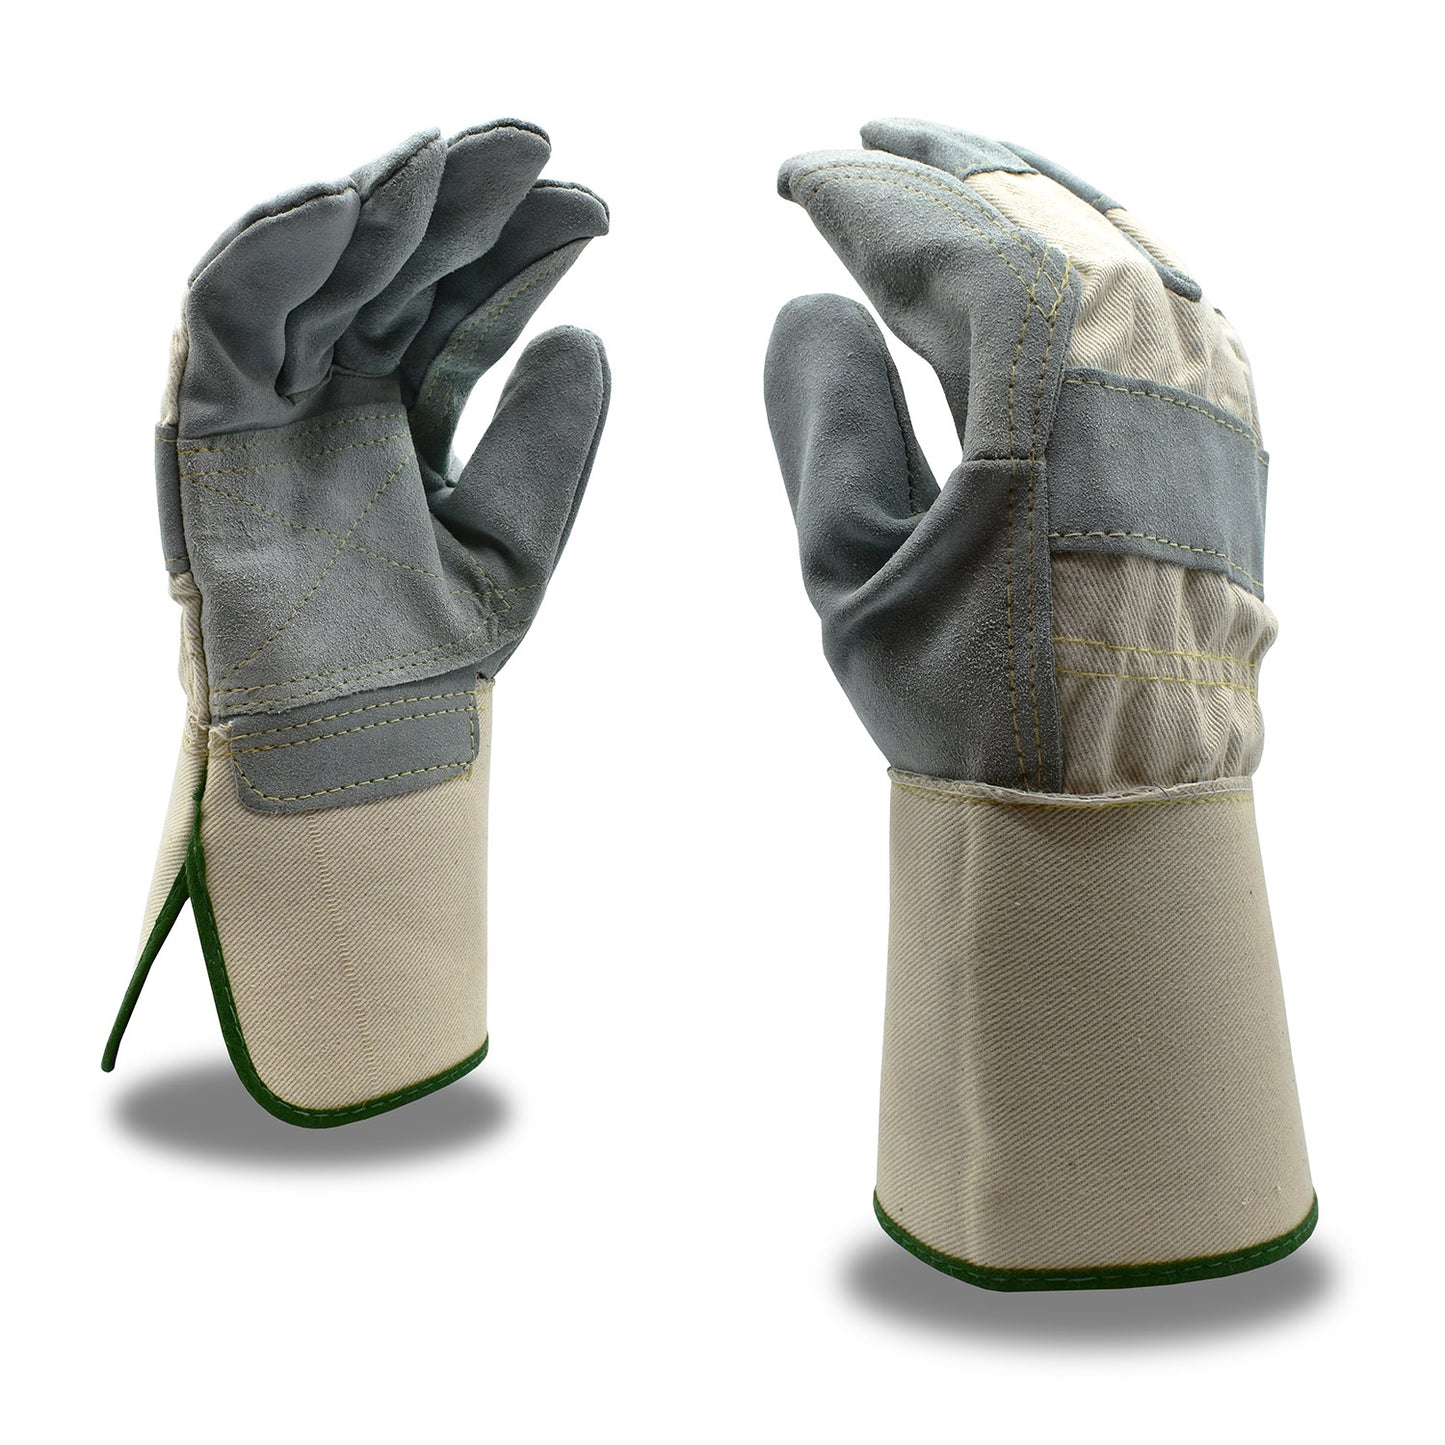 Single-Chrome Tanned Leather Double Palm Gloves, Bulk 12-Pack